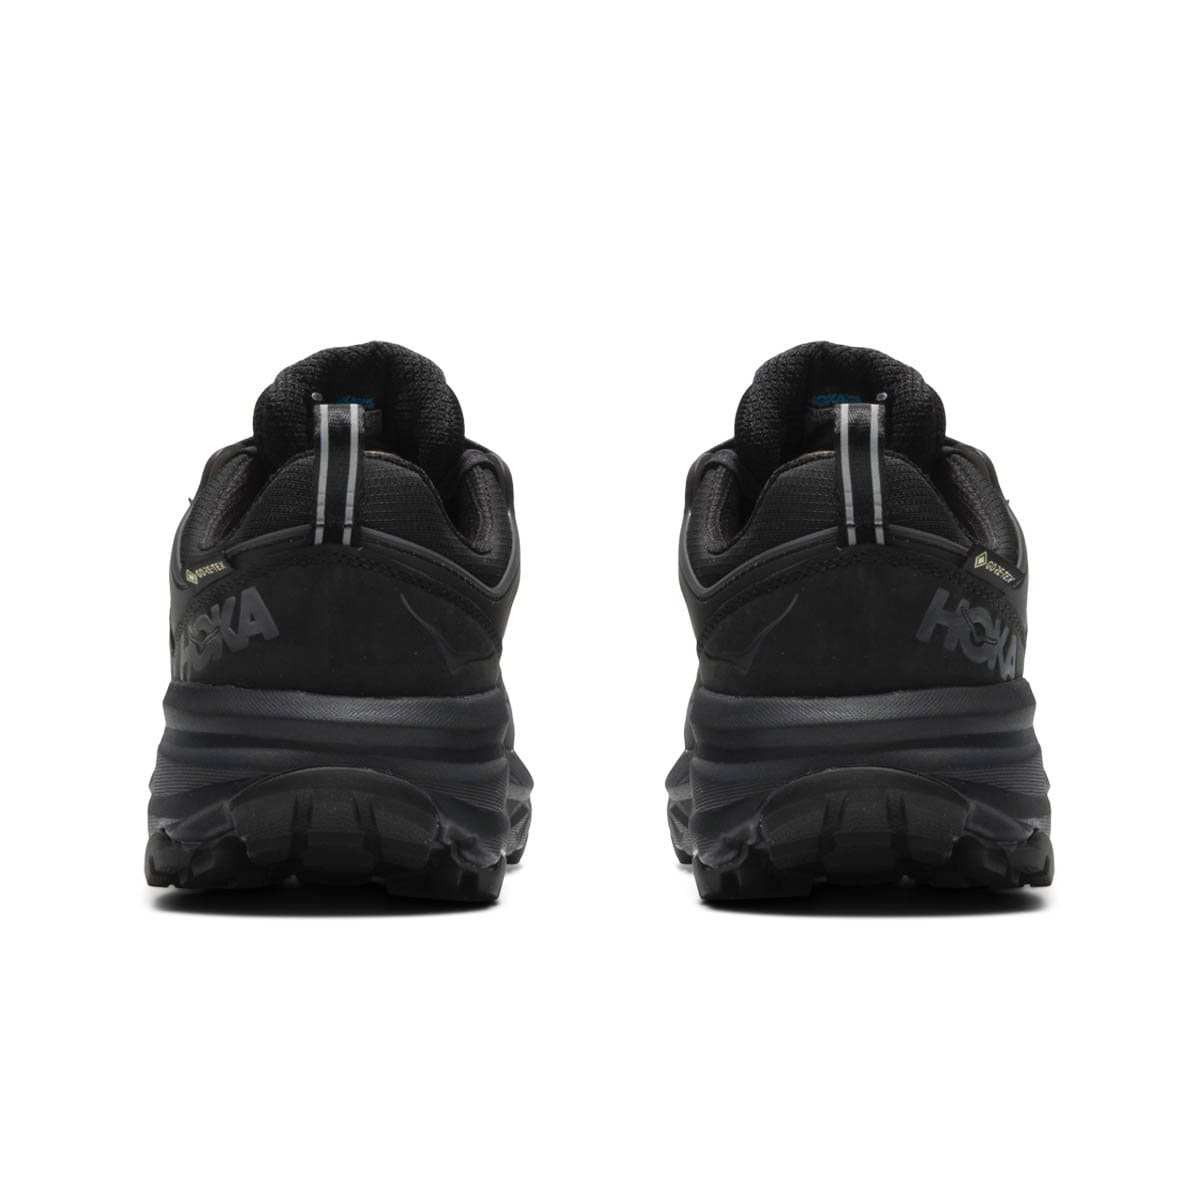 Hoka One One Shoes CHALLENGER LOW GORE-TEX